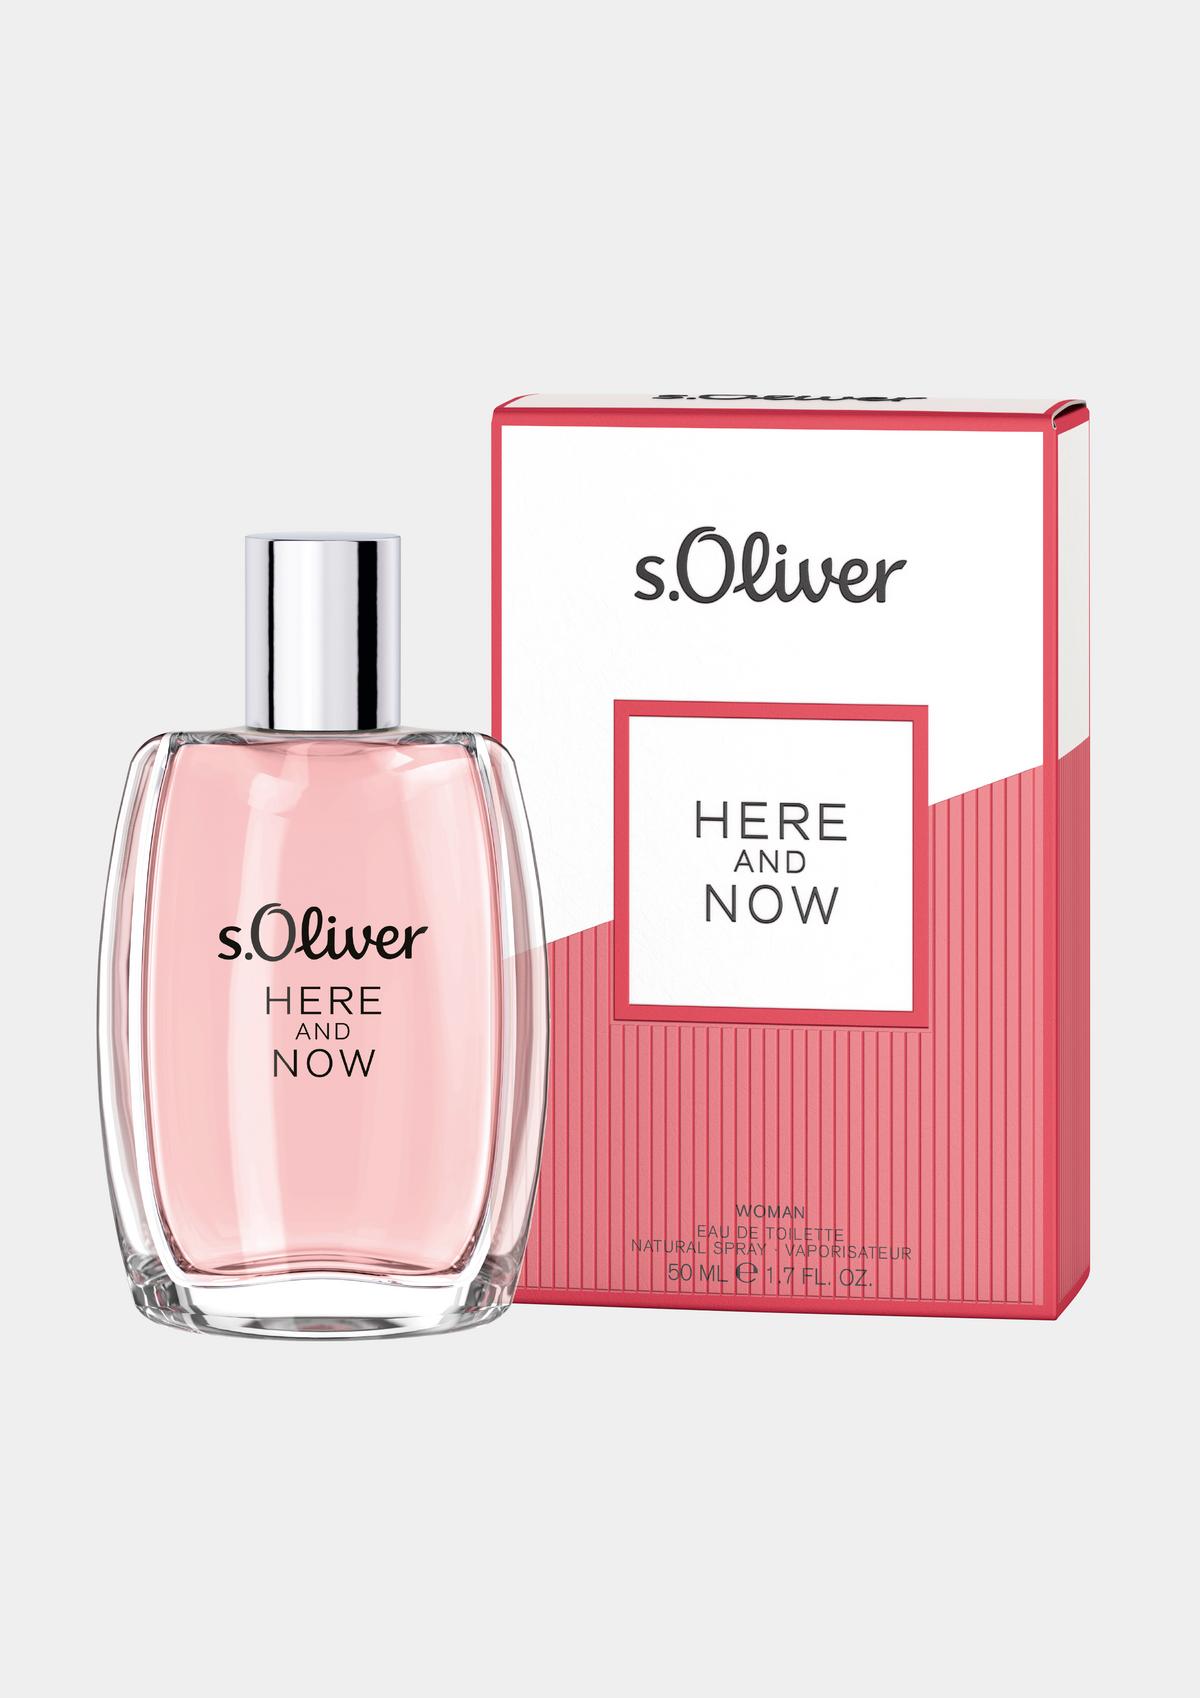 s.Oliver Toaletna voda Here And Now 50 ml